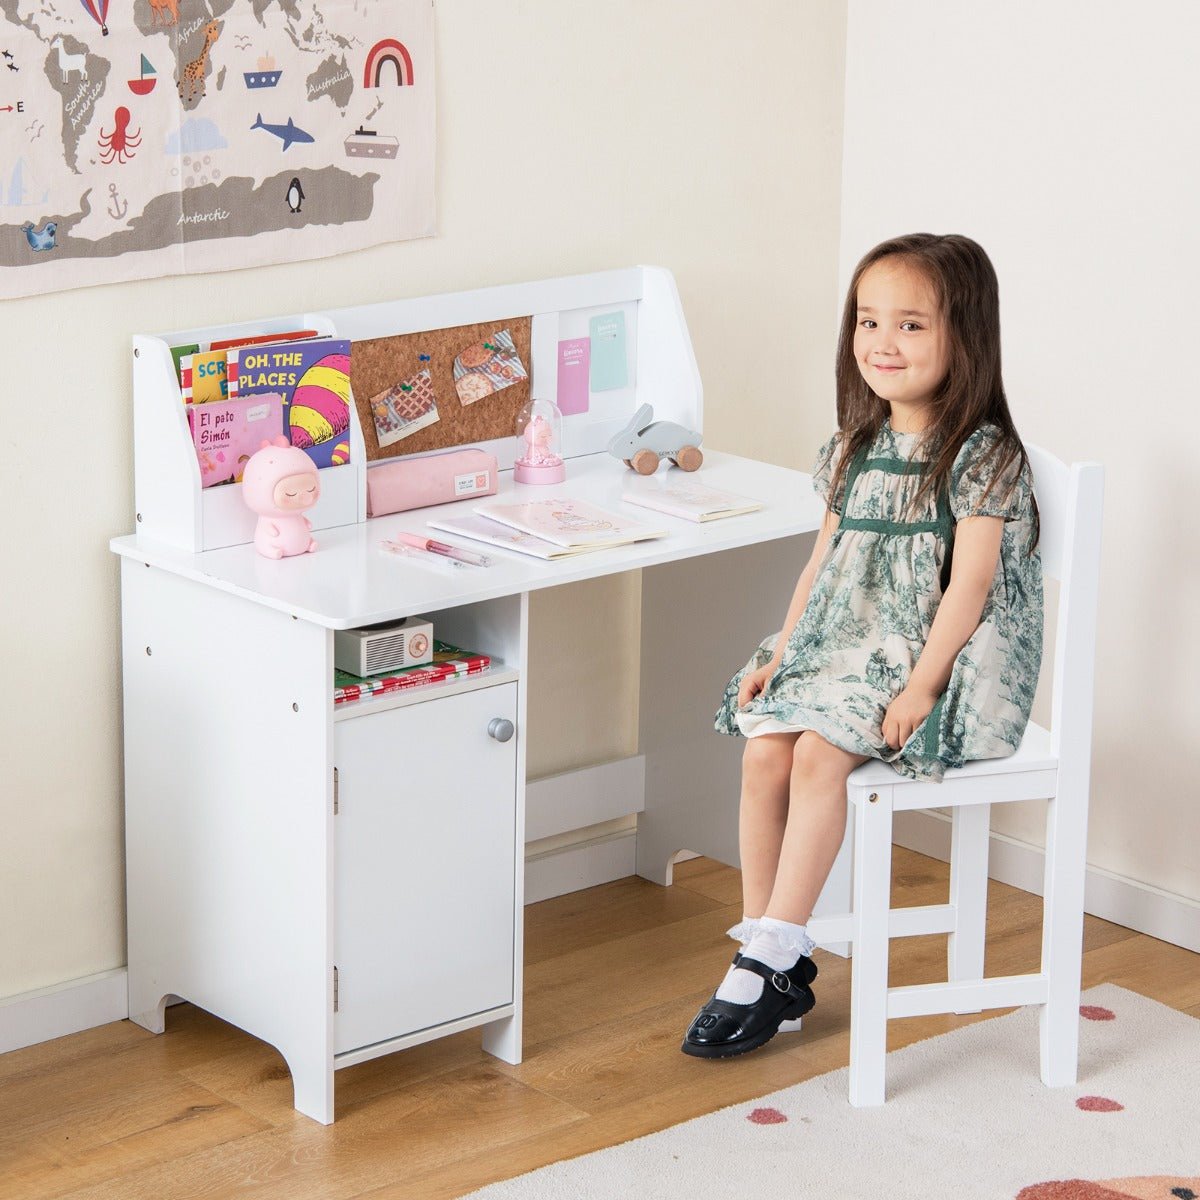 Children's Learning Desk & Chair Set: Hutch & Bulletin Board for Growth